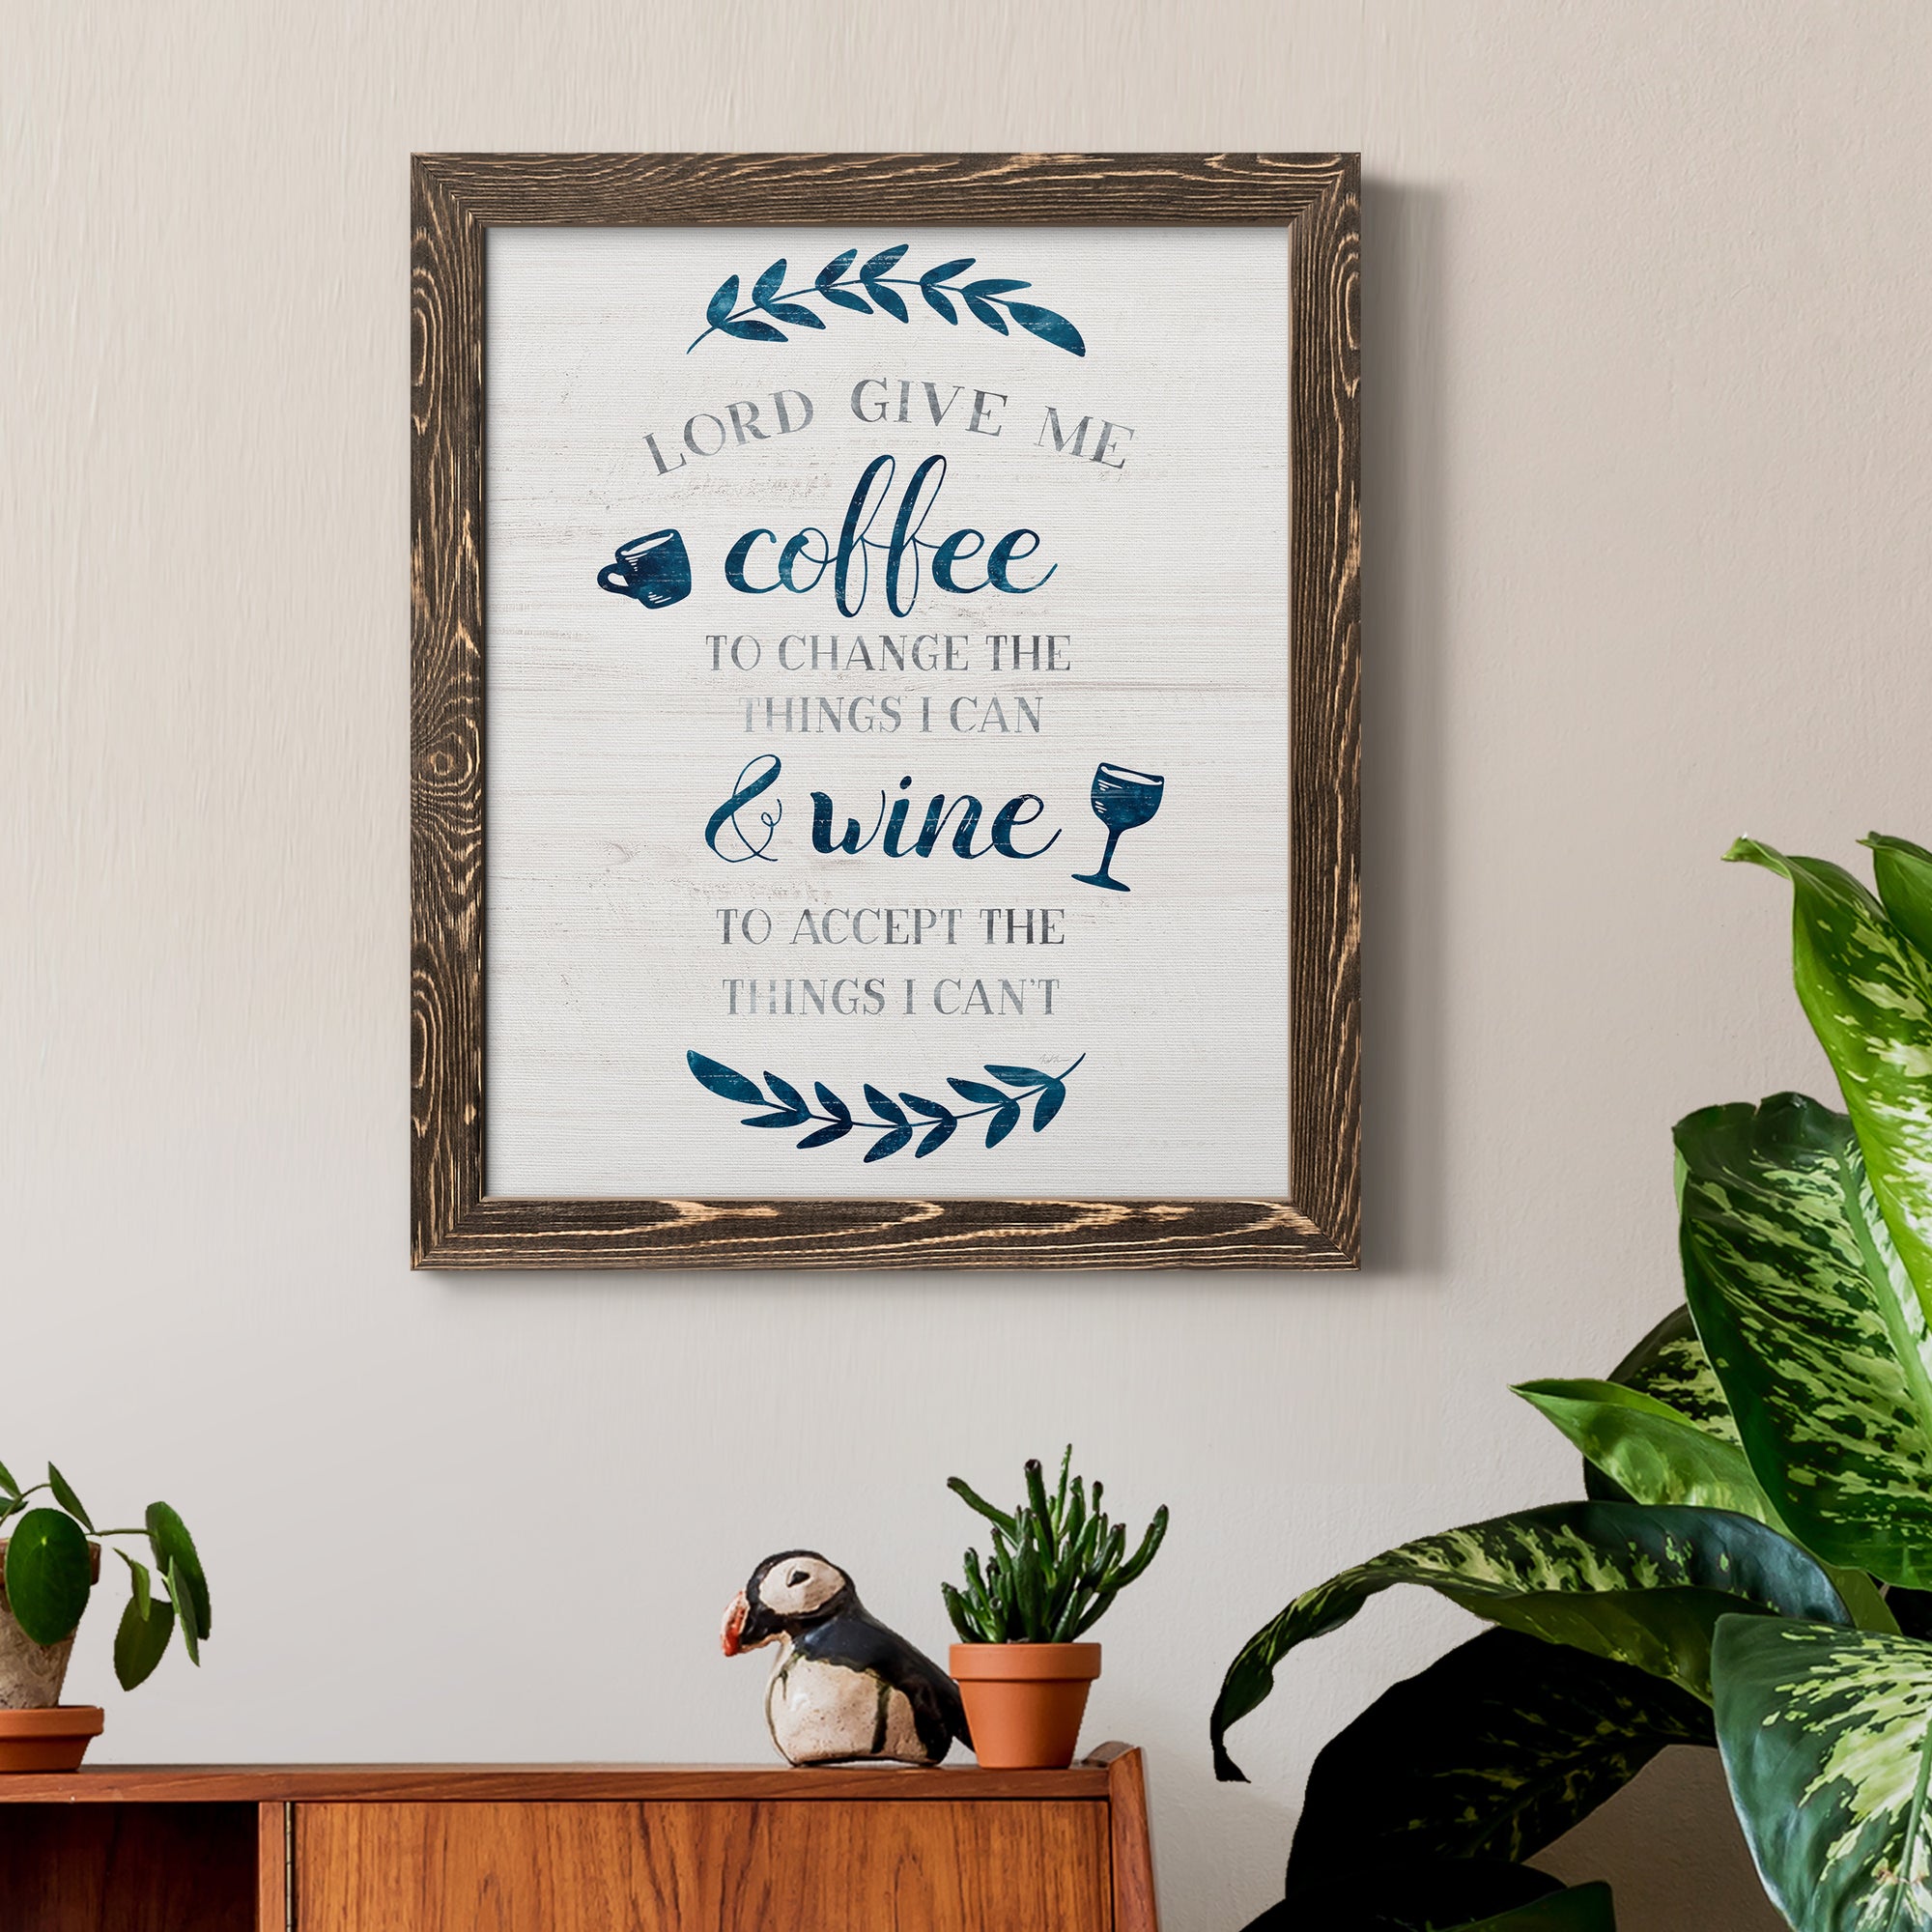 Coffee & Wine - Premium Canvas Framed in Barnwood - Ready to Hang